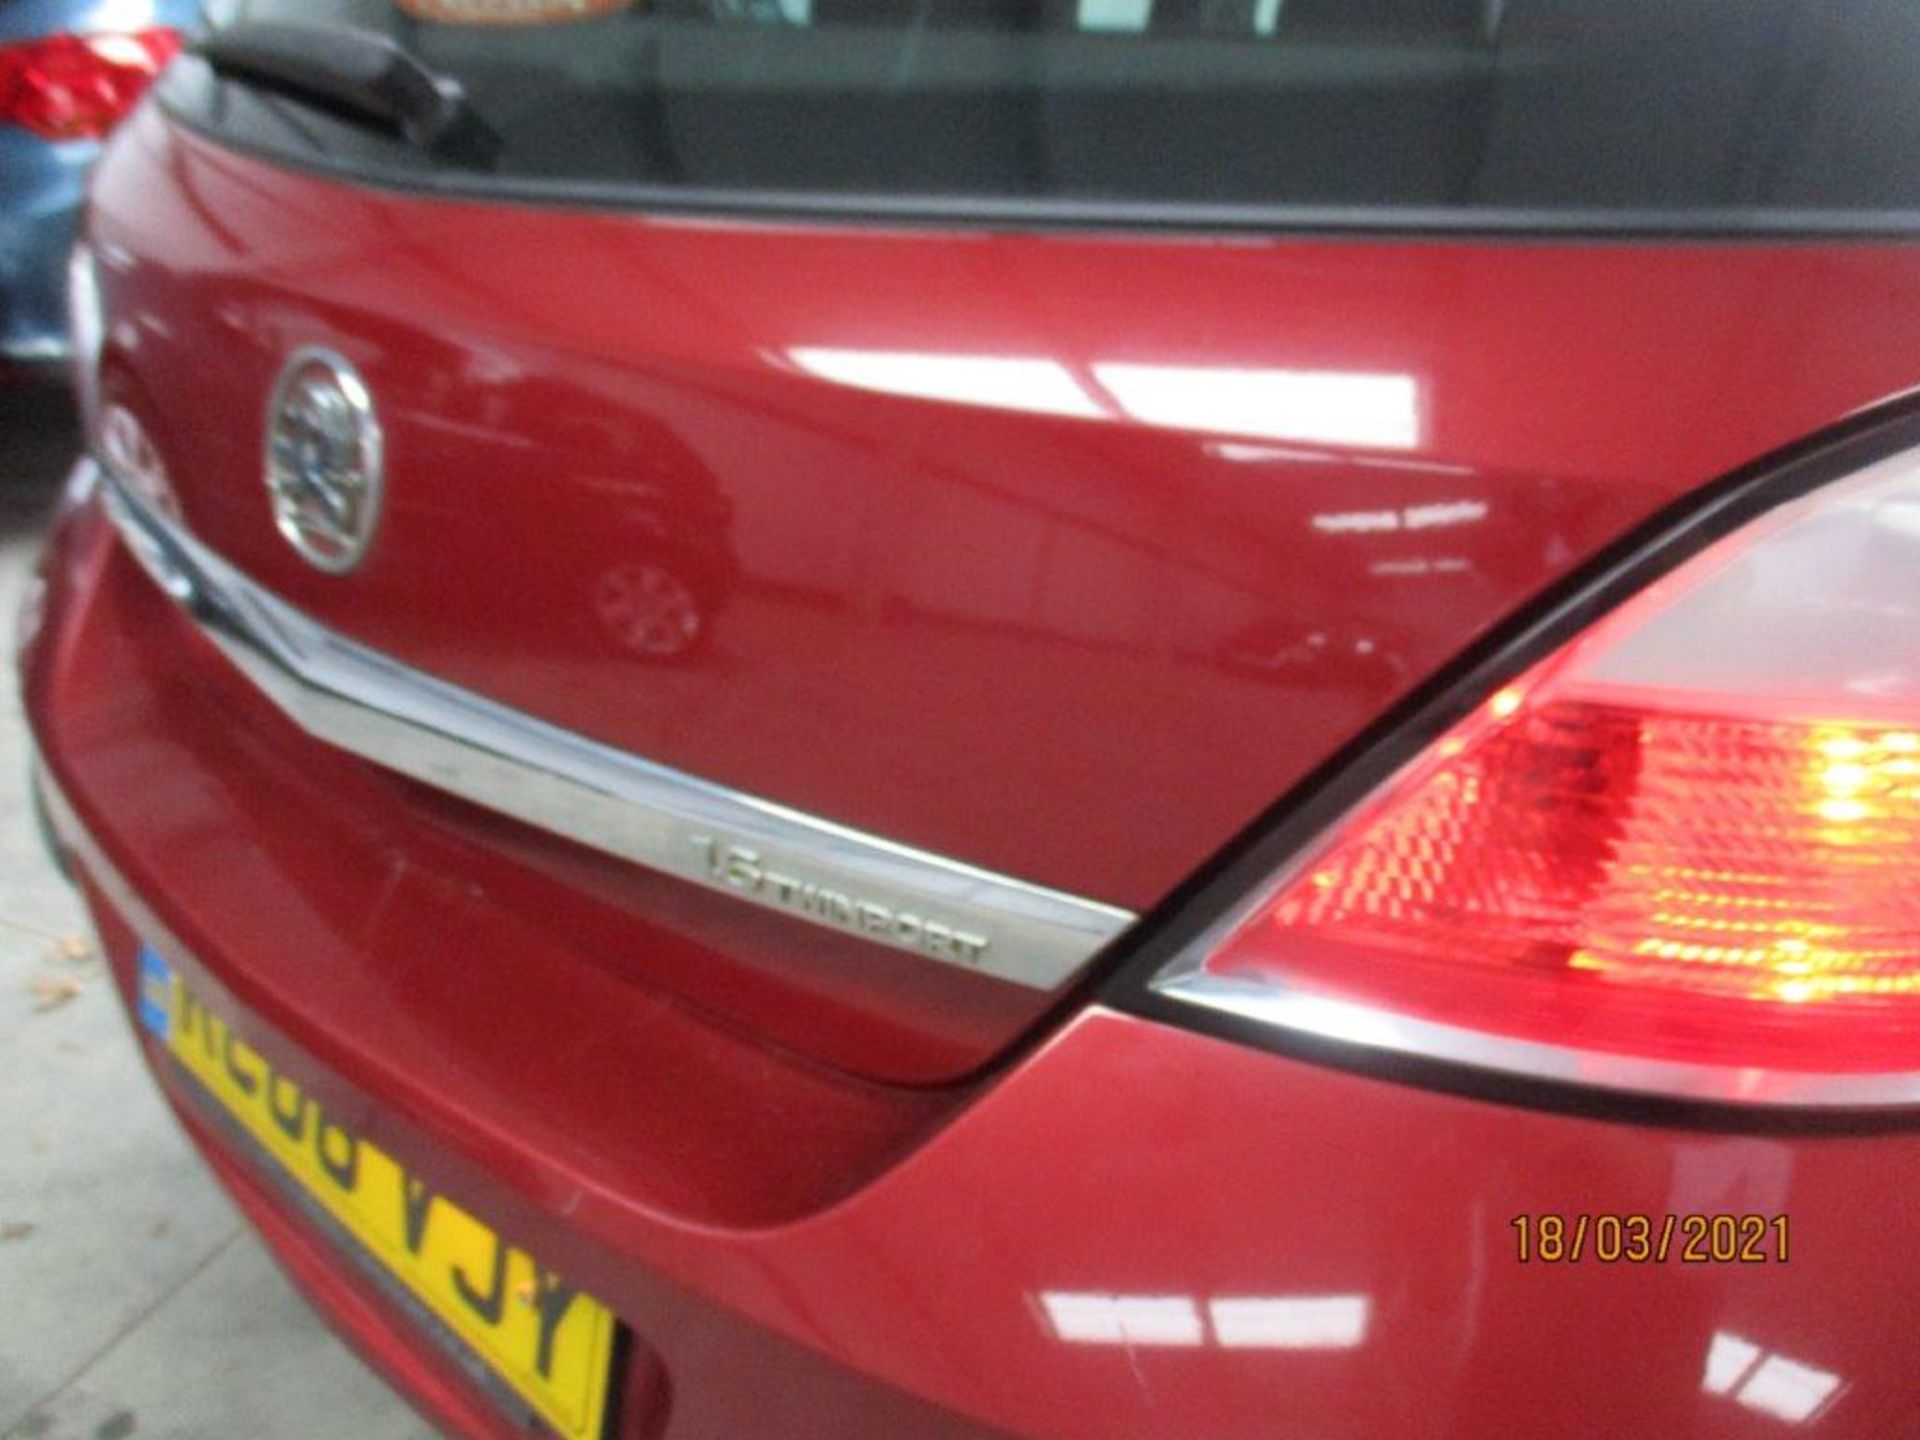 06 06 Vauxhall Astra Life Twinport - Image 15 of 23